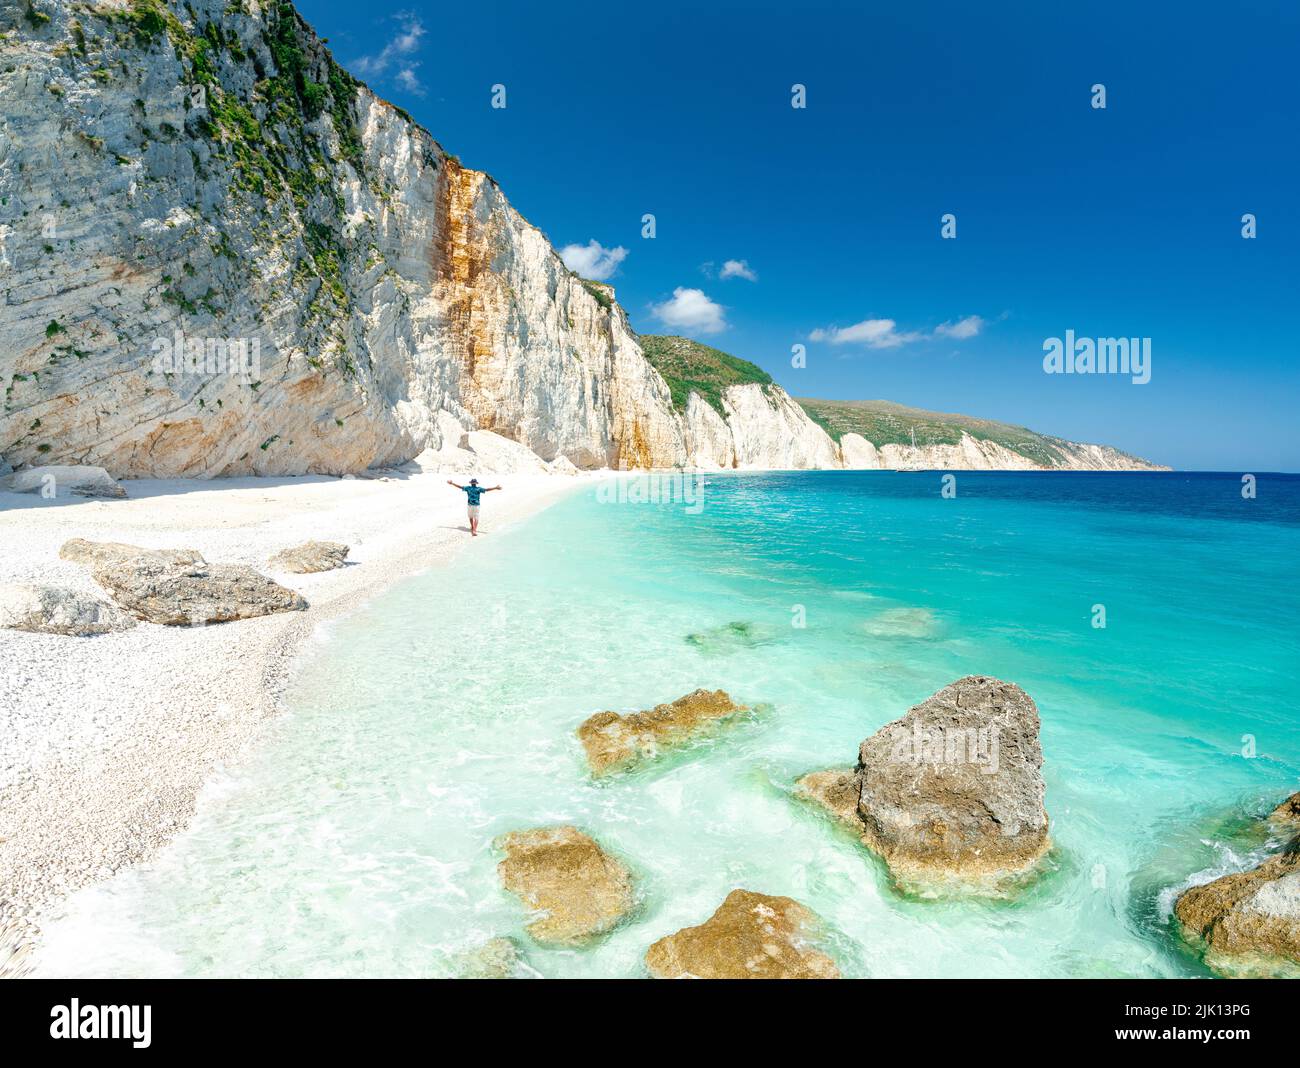 Aerial view of cheerful man with arms outstretched admiring the crystal sea at Fteri Beach, Kefalonia, Ionian Islands, Greek Islands, Greece, Europe Stock Photo